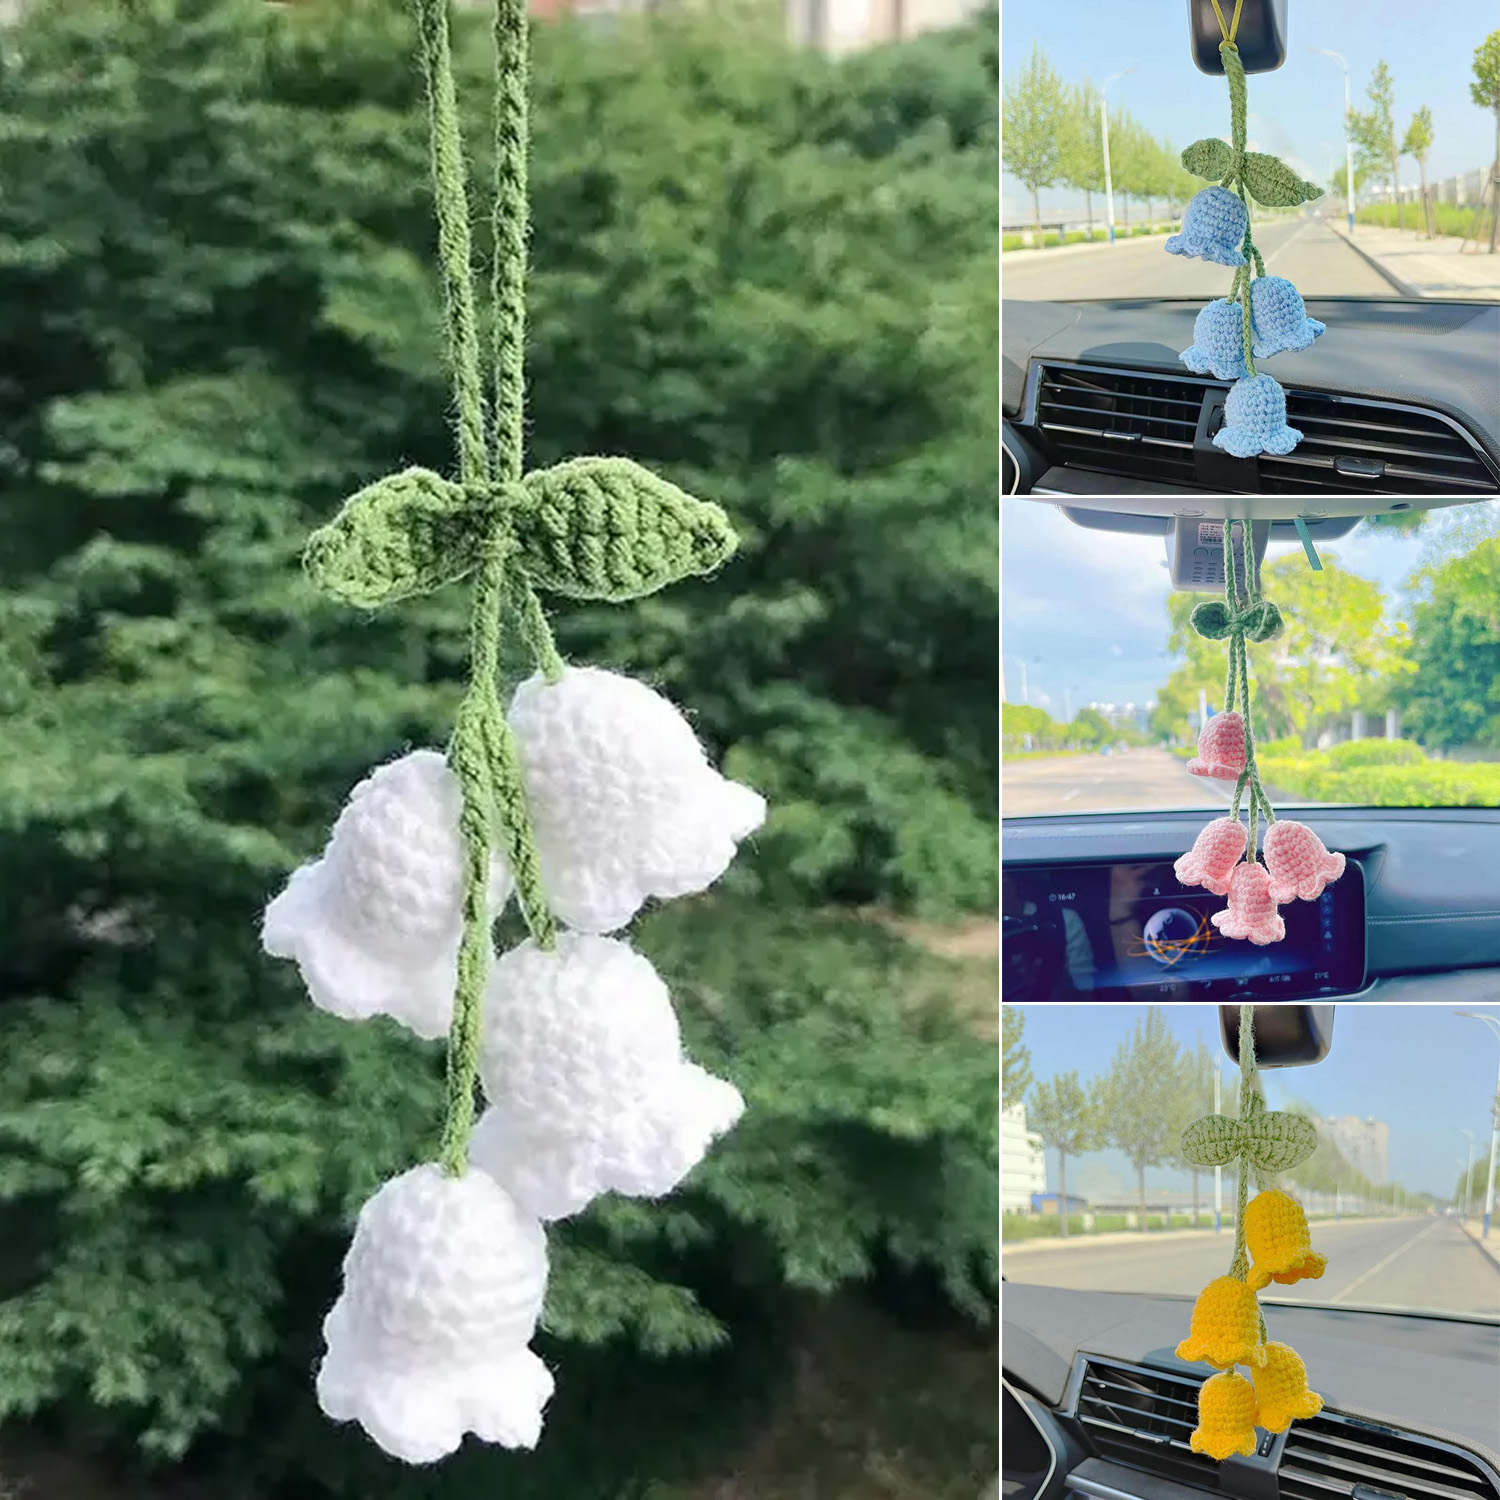 https://img.kwcdn.com/product/knitted-car-pendant/d69d2f15w98k18-67dce188/open/2023-05-11/1683816280156-b7bb1bad9ea24712a403a9e2fbb39a41-goods.jpeg?imageView2/2/w/500/q/60/format/webp